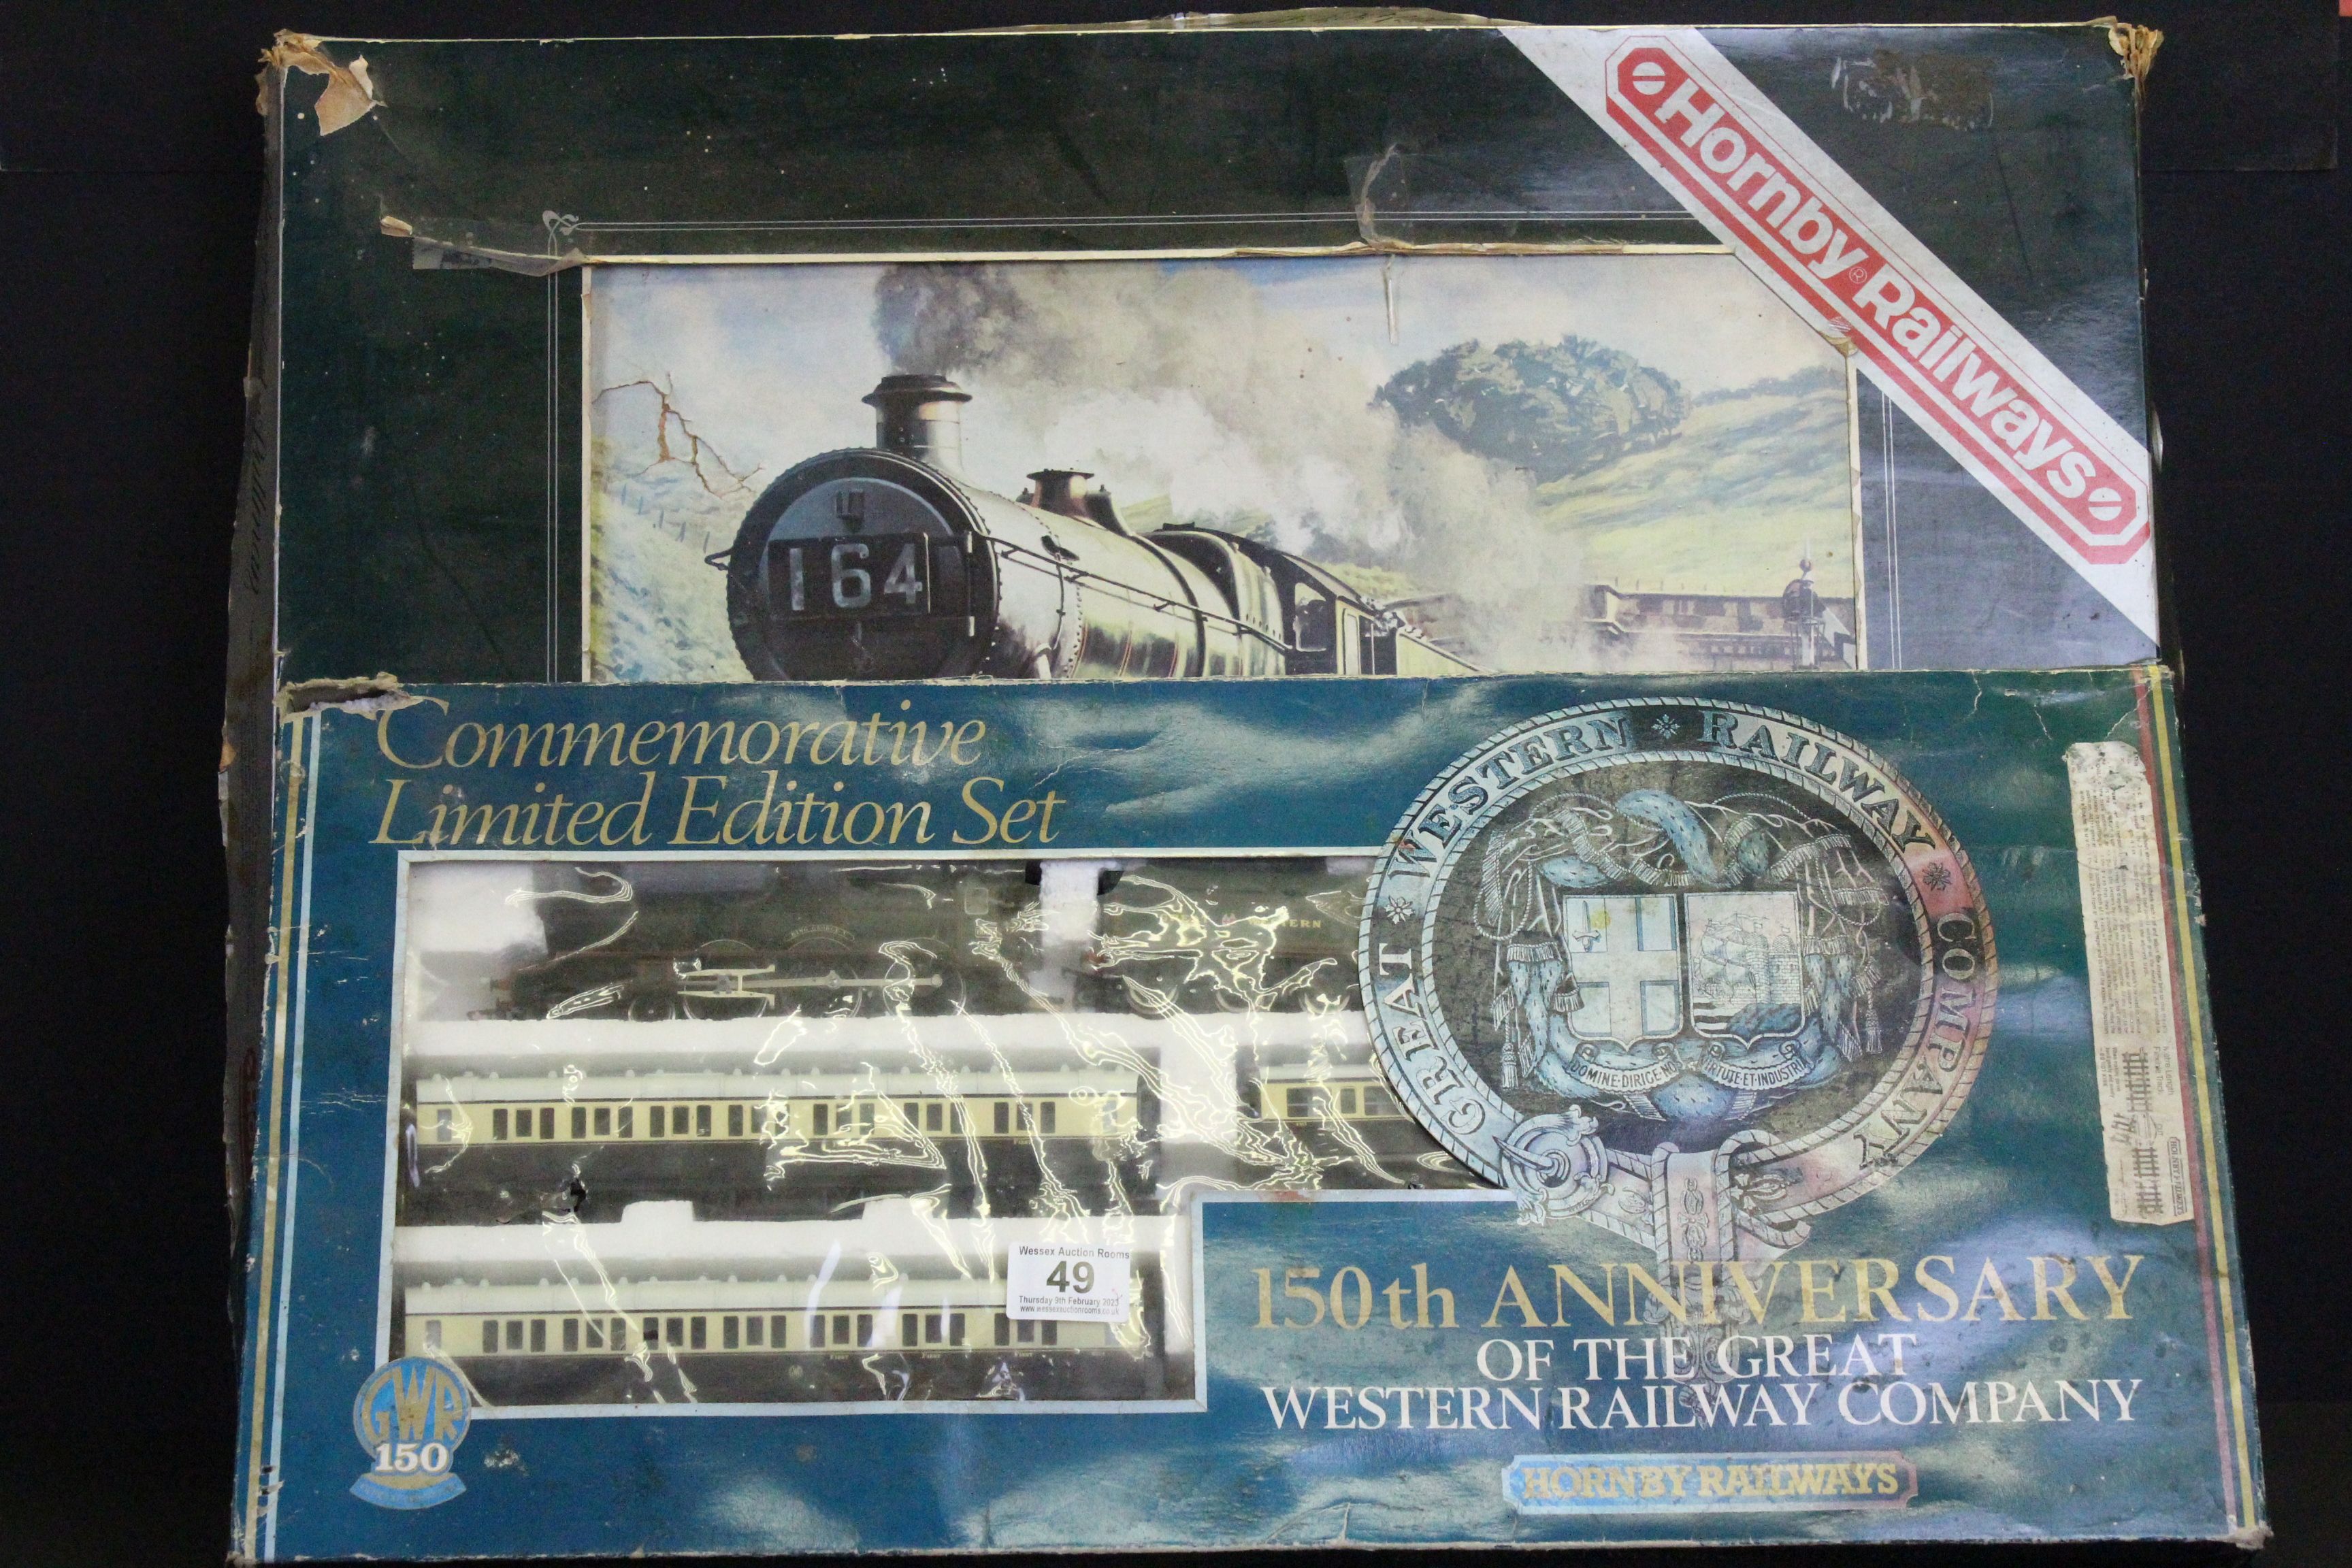 Two boxed Hornby OO gauge train sets to include R687 Silver Jubilee Pullman Set and ltd edn 150th